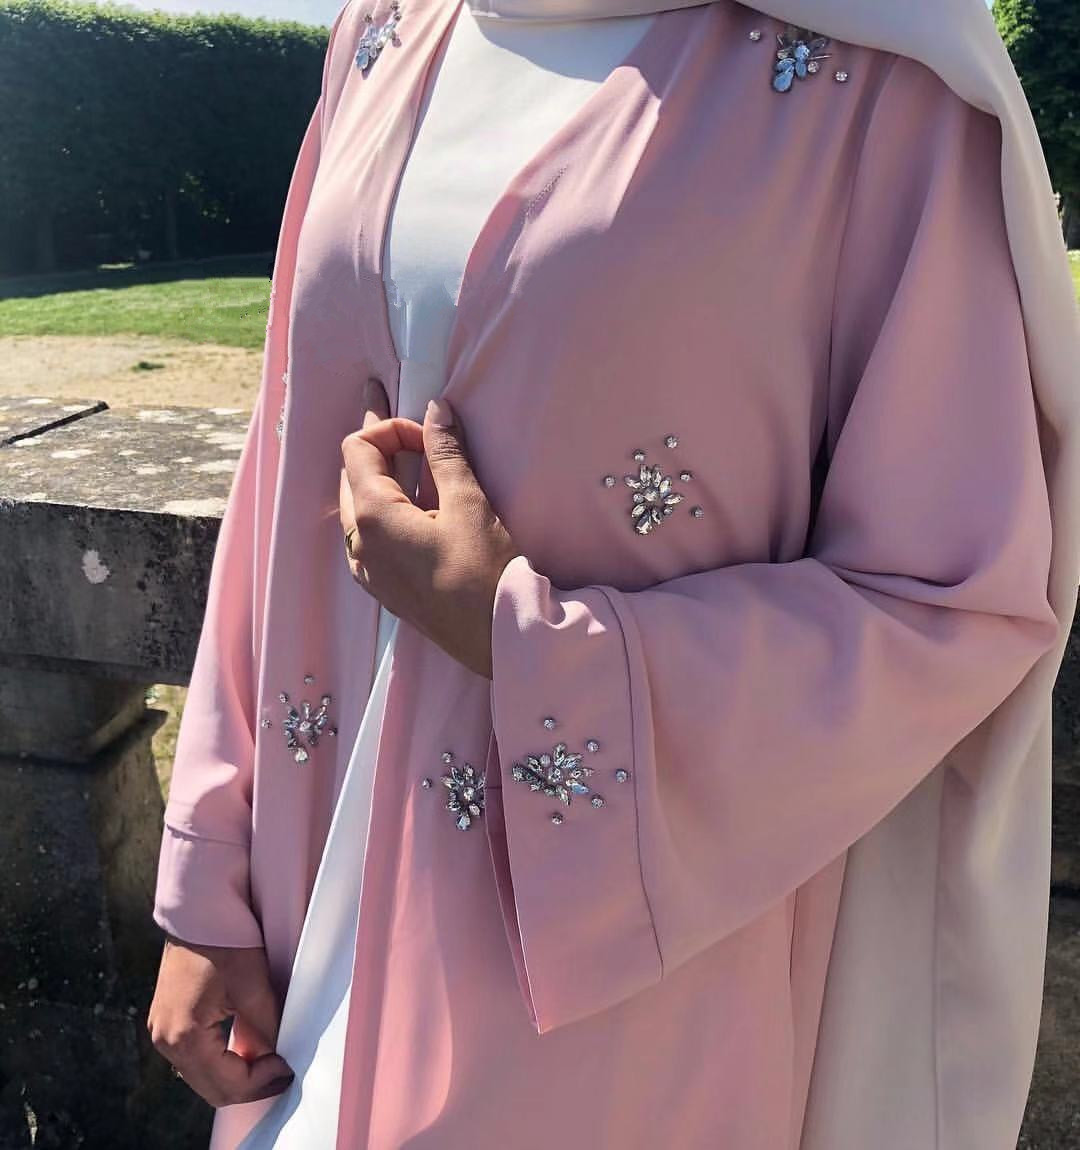 Best Selling Arabic Islamic Clothing Front Muslim Abaya for Ladies with Diamond Stones Decoration